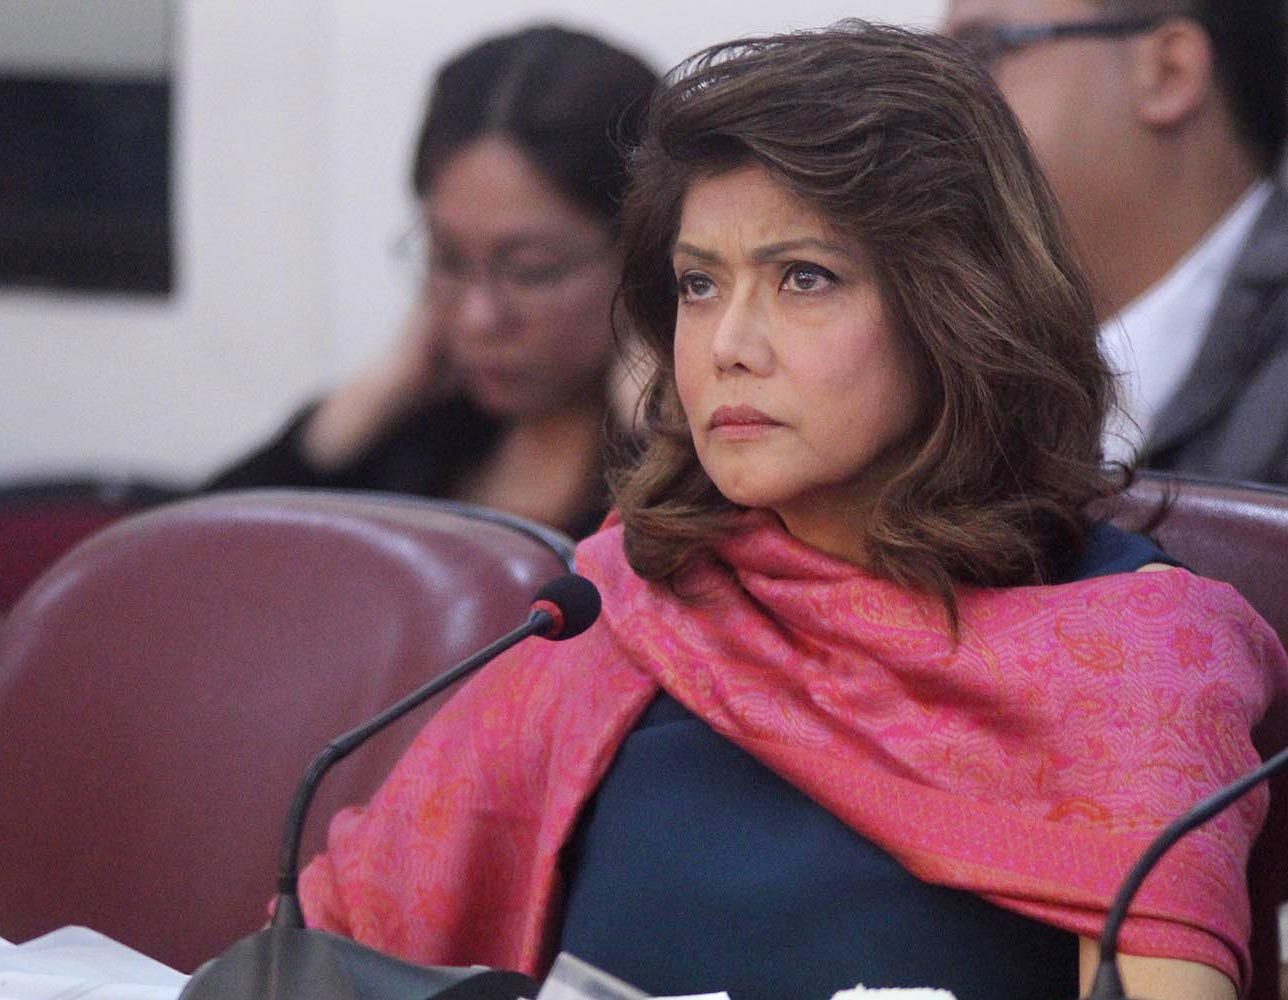 ONGOING PROBE. Ilocos Norte Governor Imee Marcos attends a probe into the province's alleged anomalous purchase of vehicles using tobacco funds. Photo by Darren Langit/Rappler 